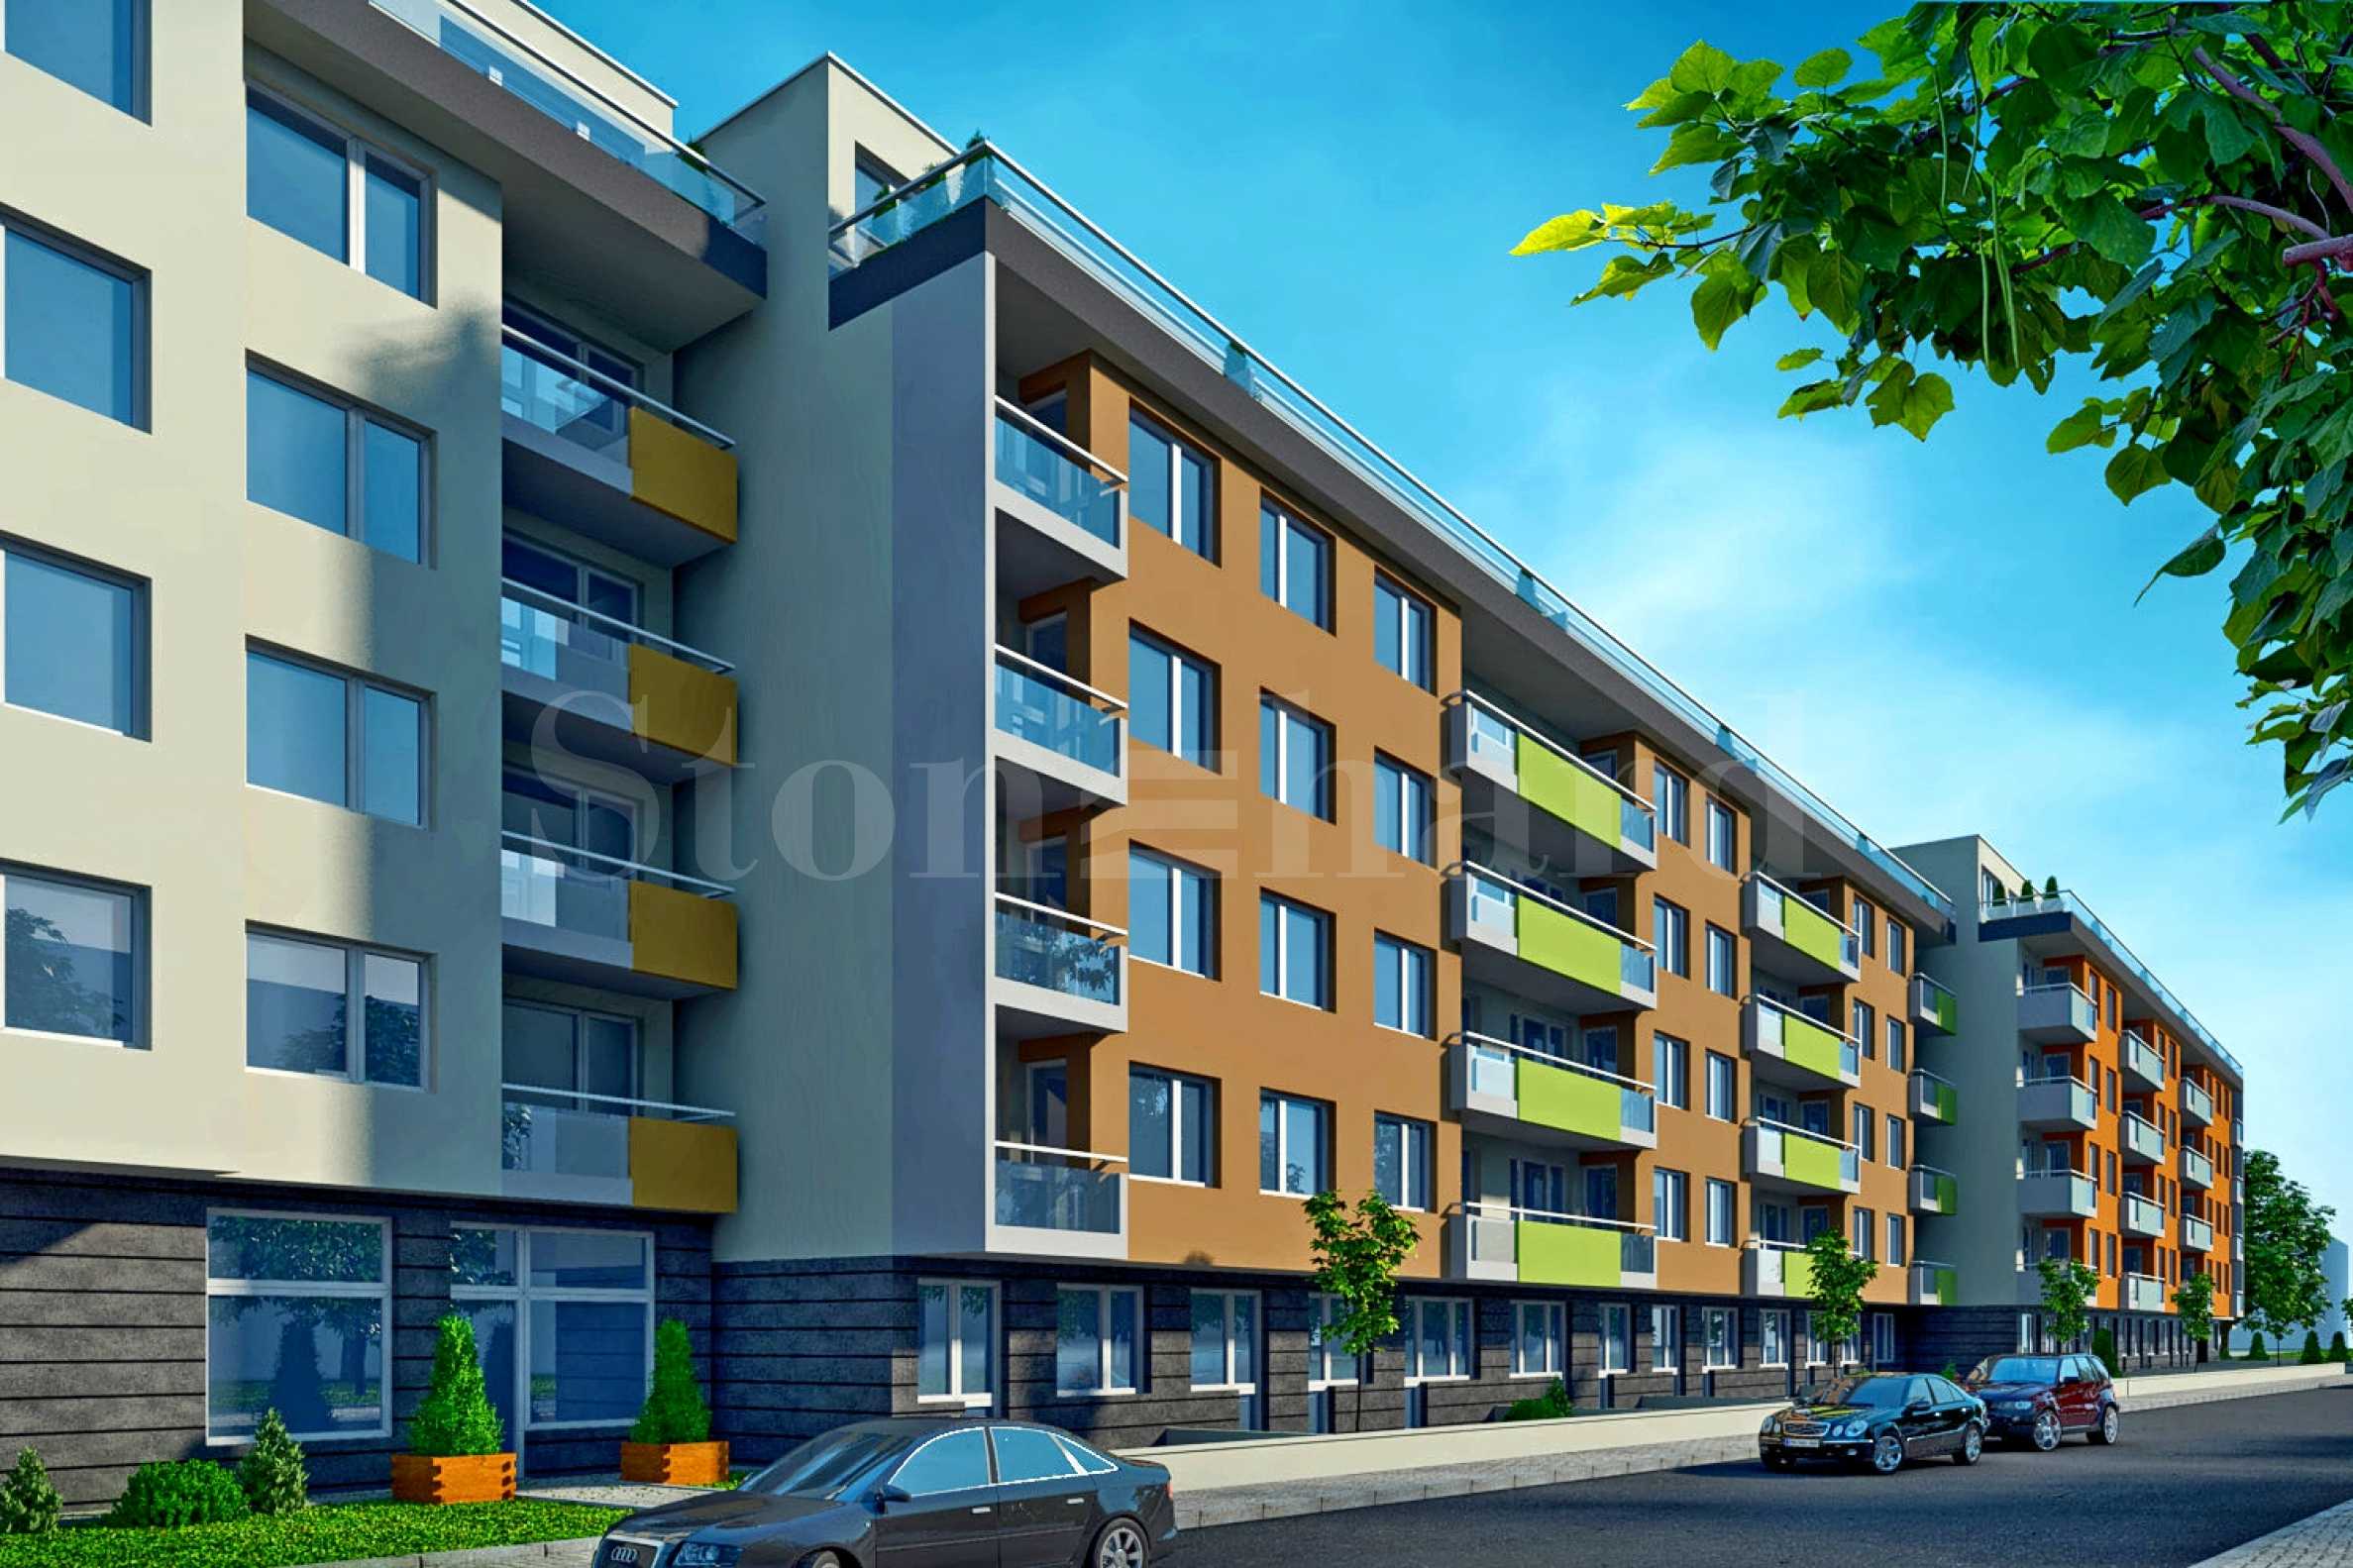 Newly built apartments in the southern part of the city of Plovdiv1 - Stonehard